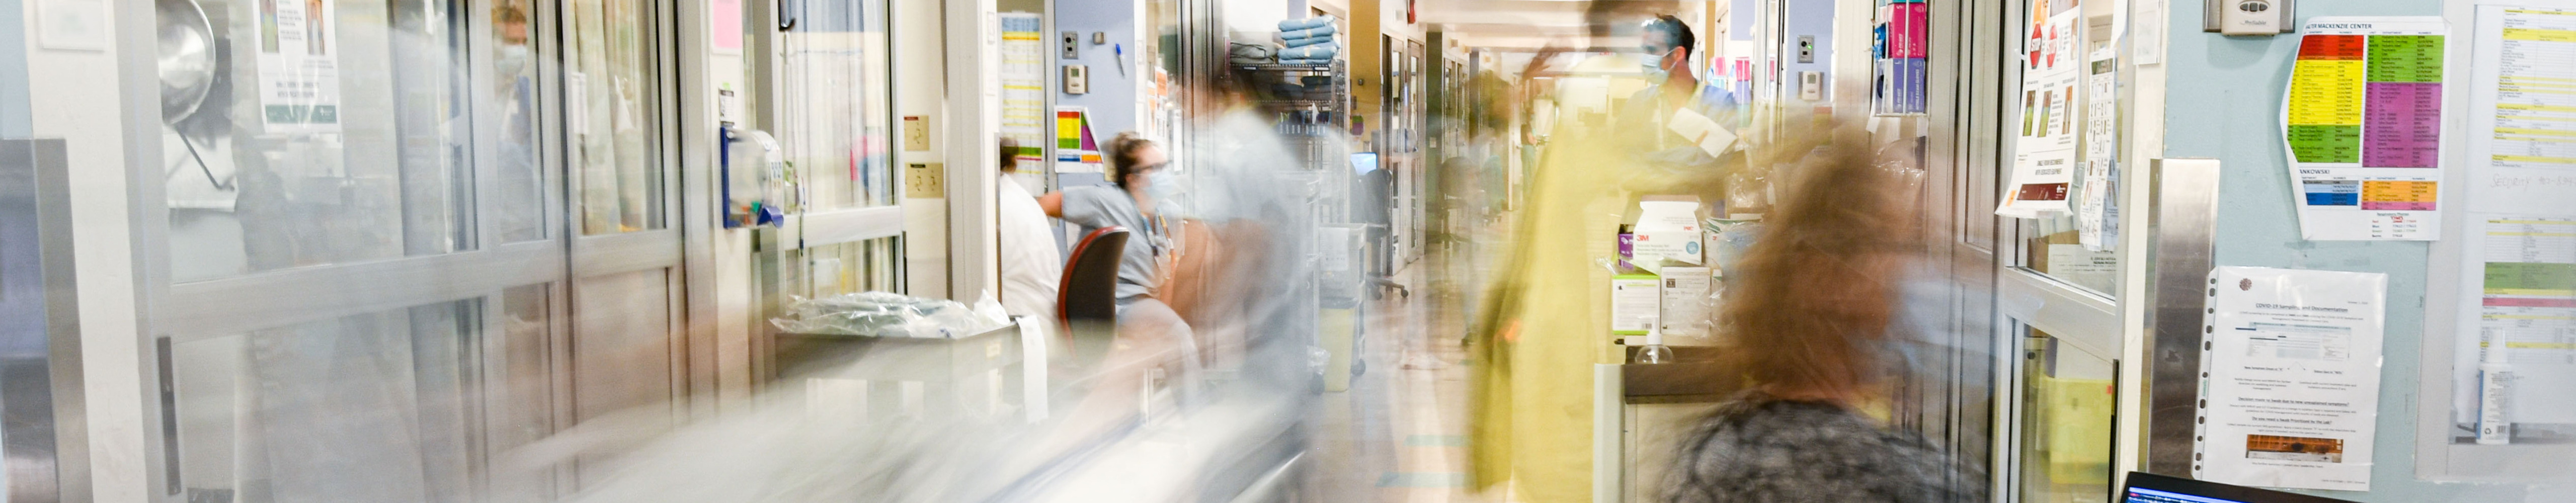 Healthcare workers bustling in a high-paced, critical care hospital setting.